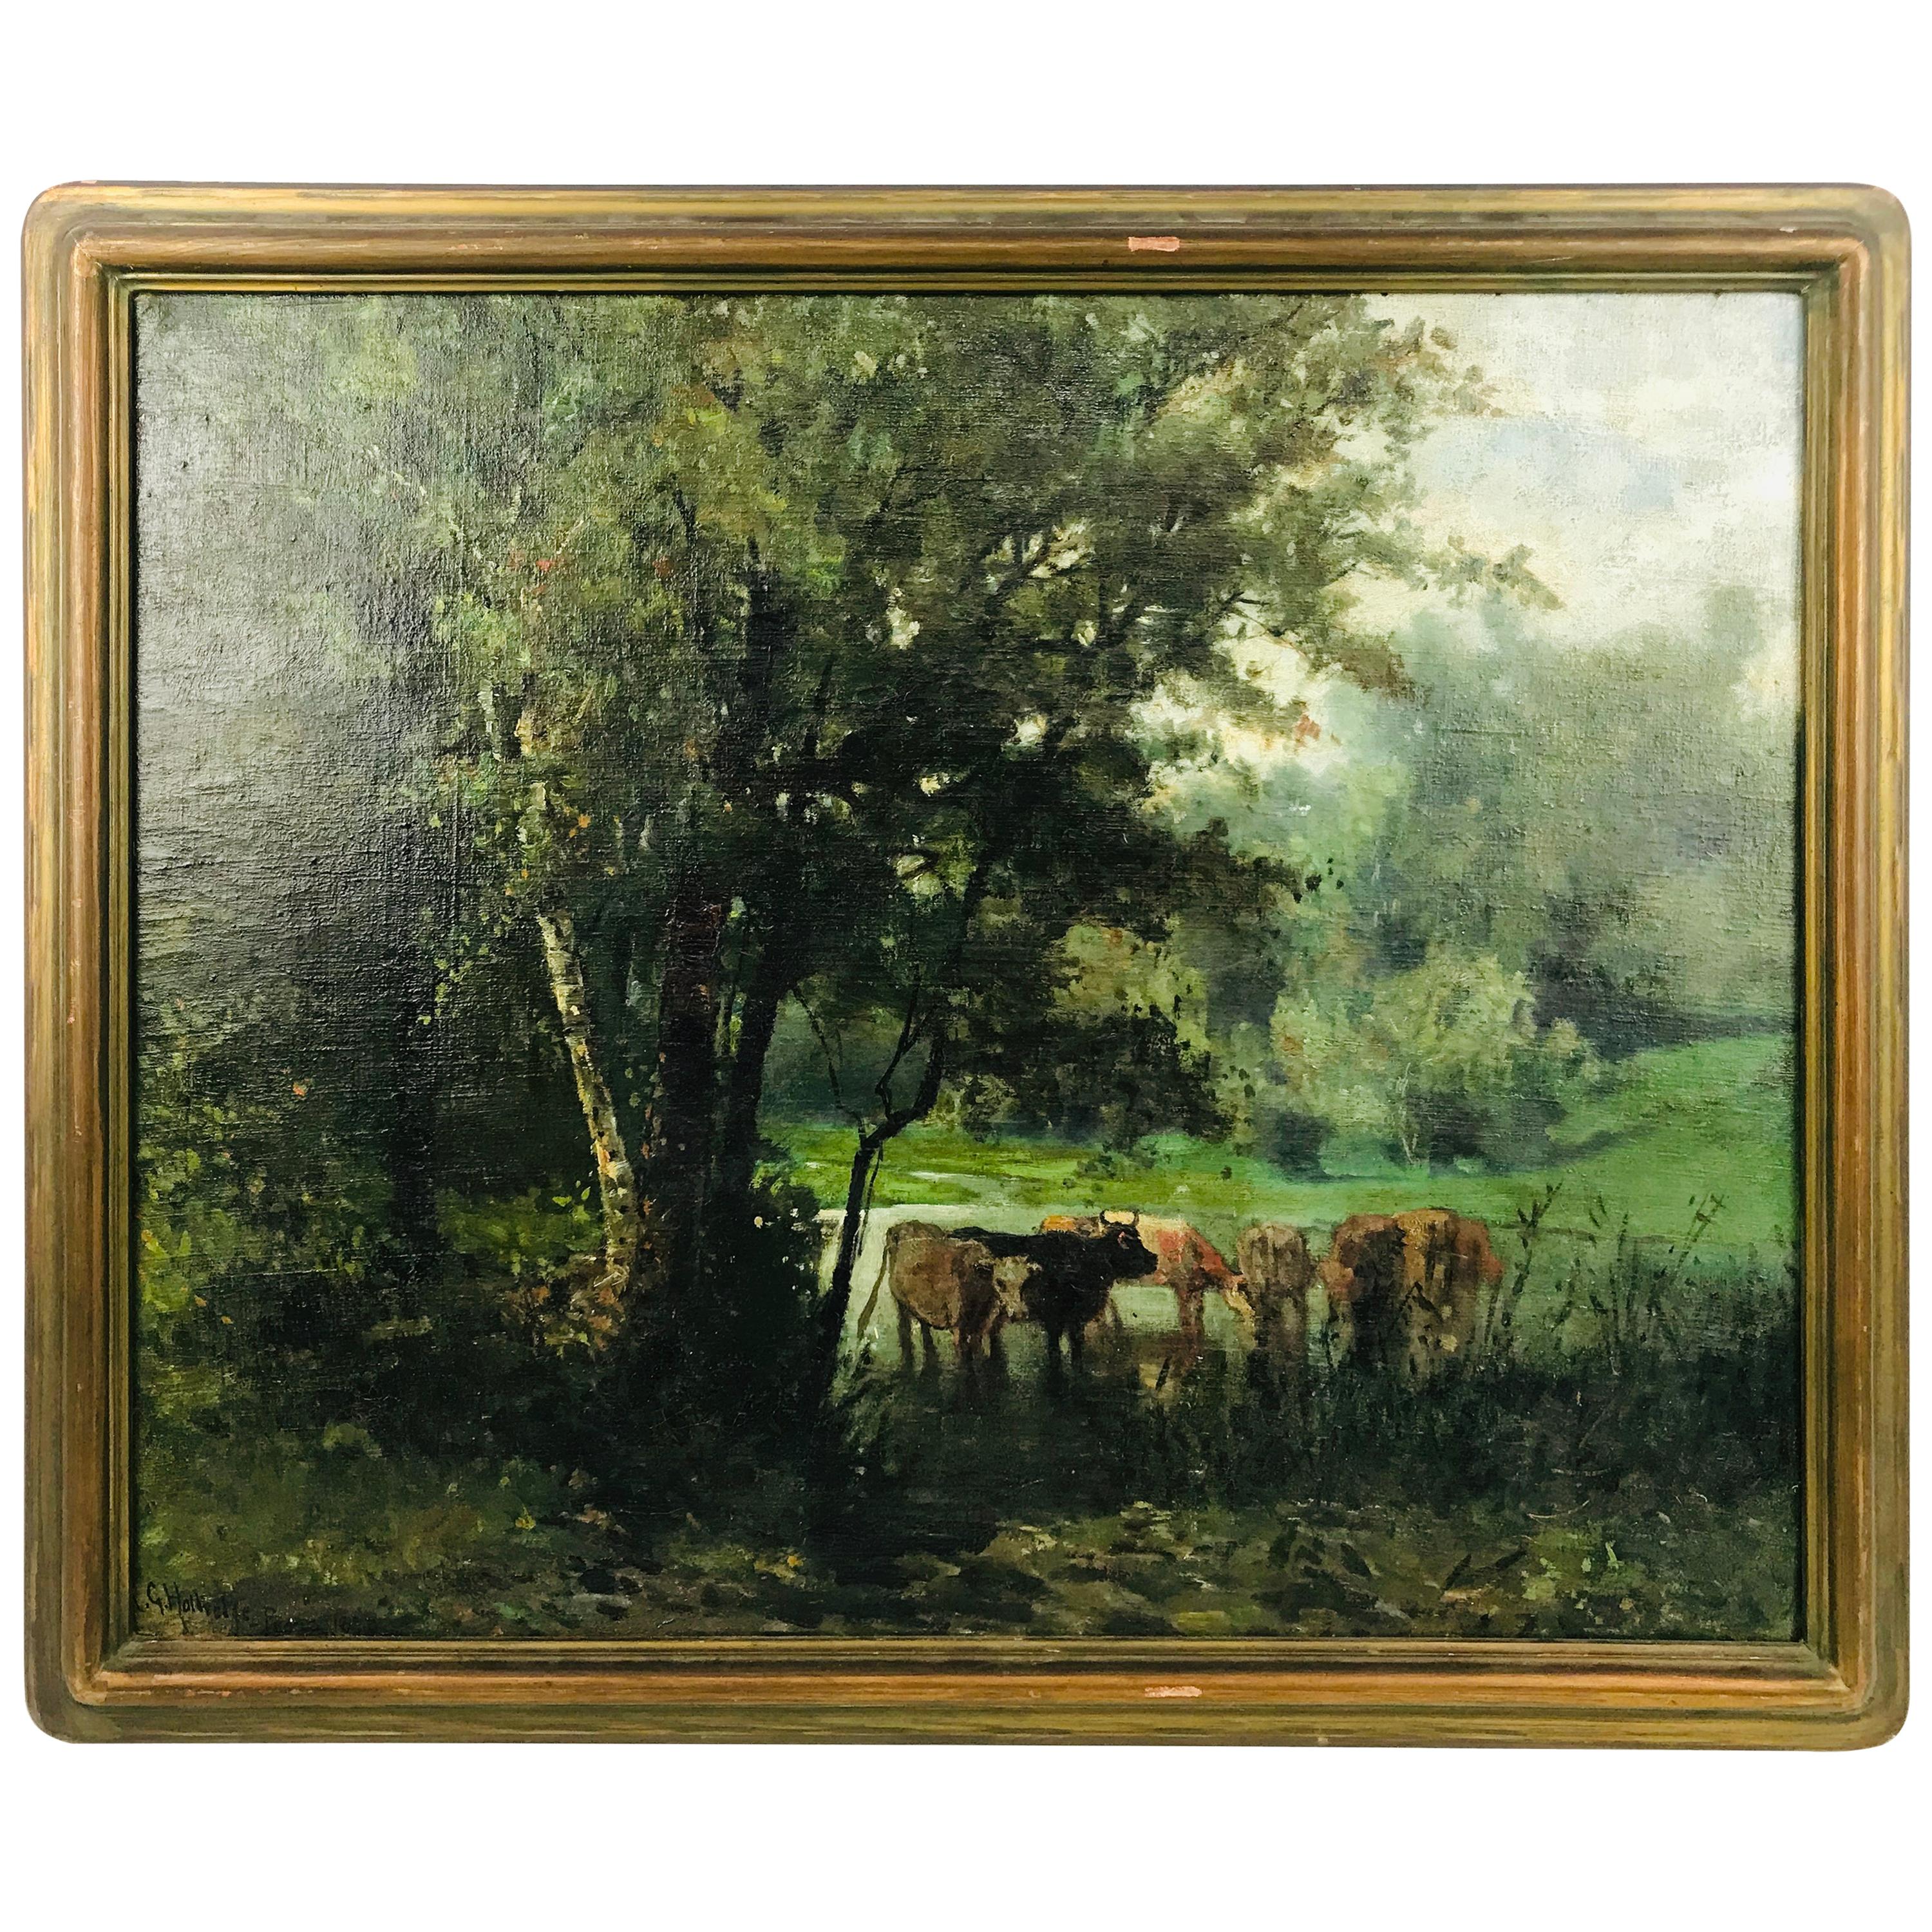 Signed "Cows with Water and Landscape" Oil on Canvas by Ransome Gillet Holdridge